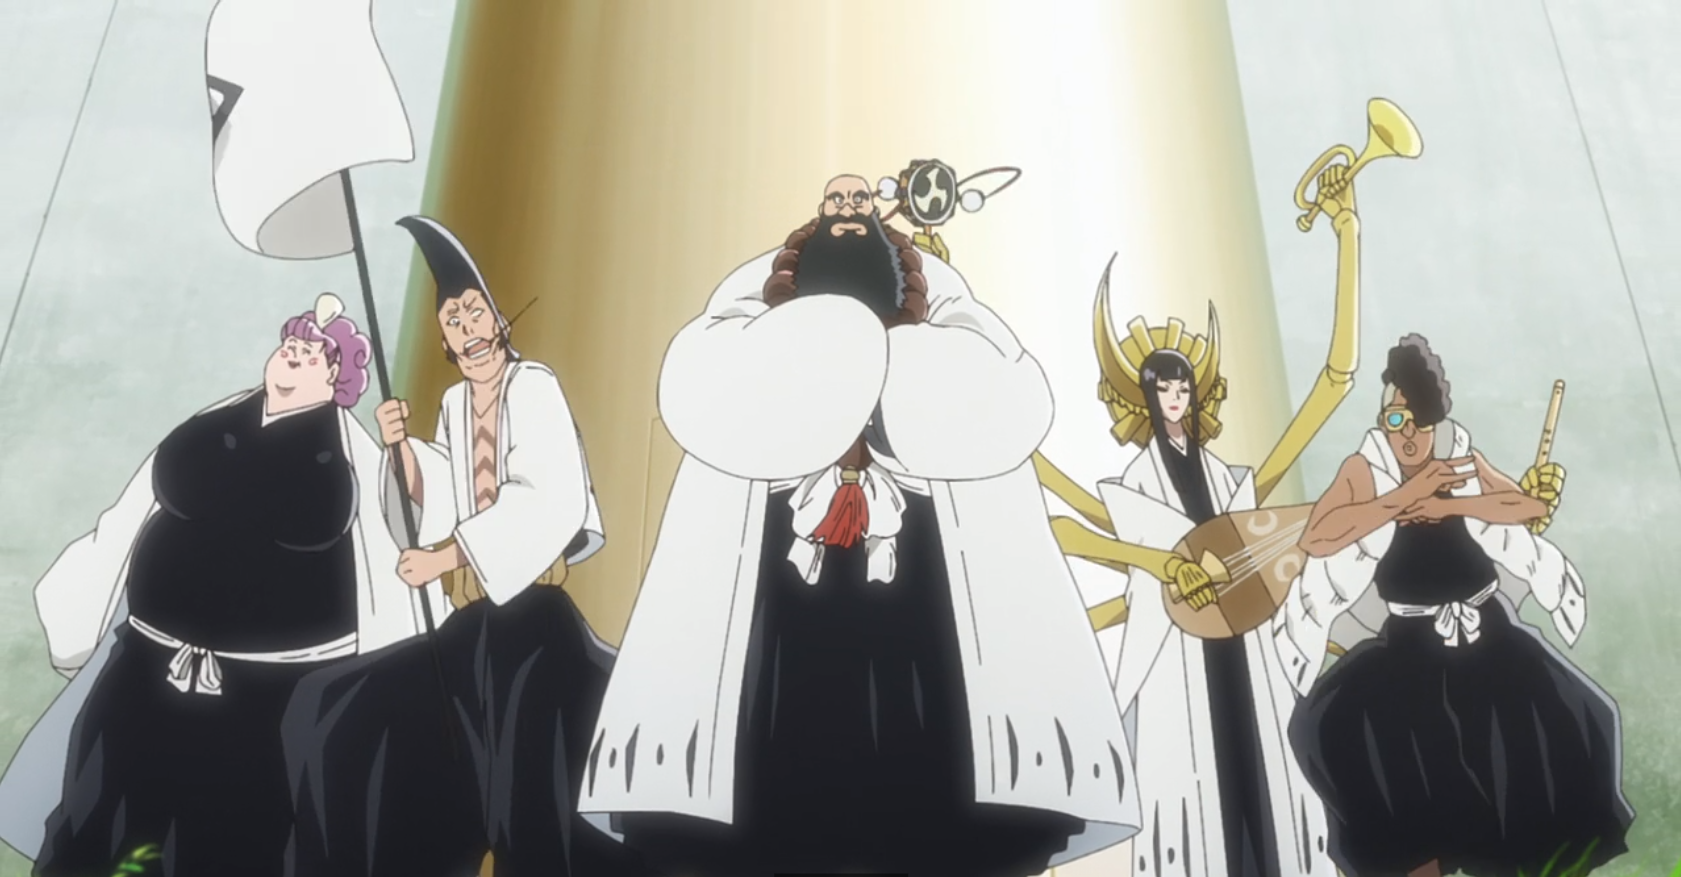 TYBW Episode 18 cut content from the fight : r/bleach